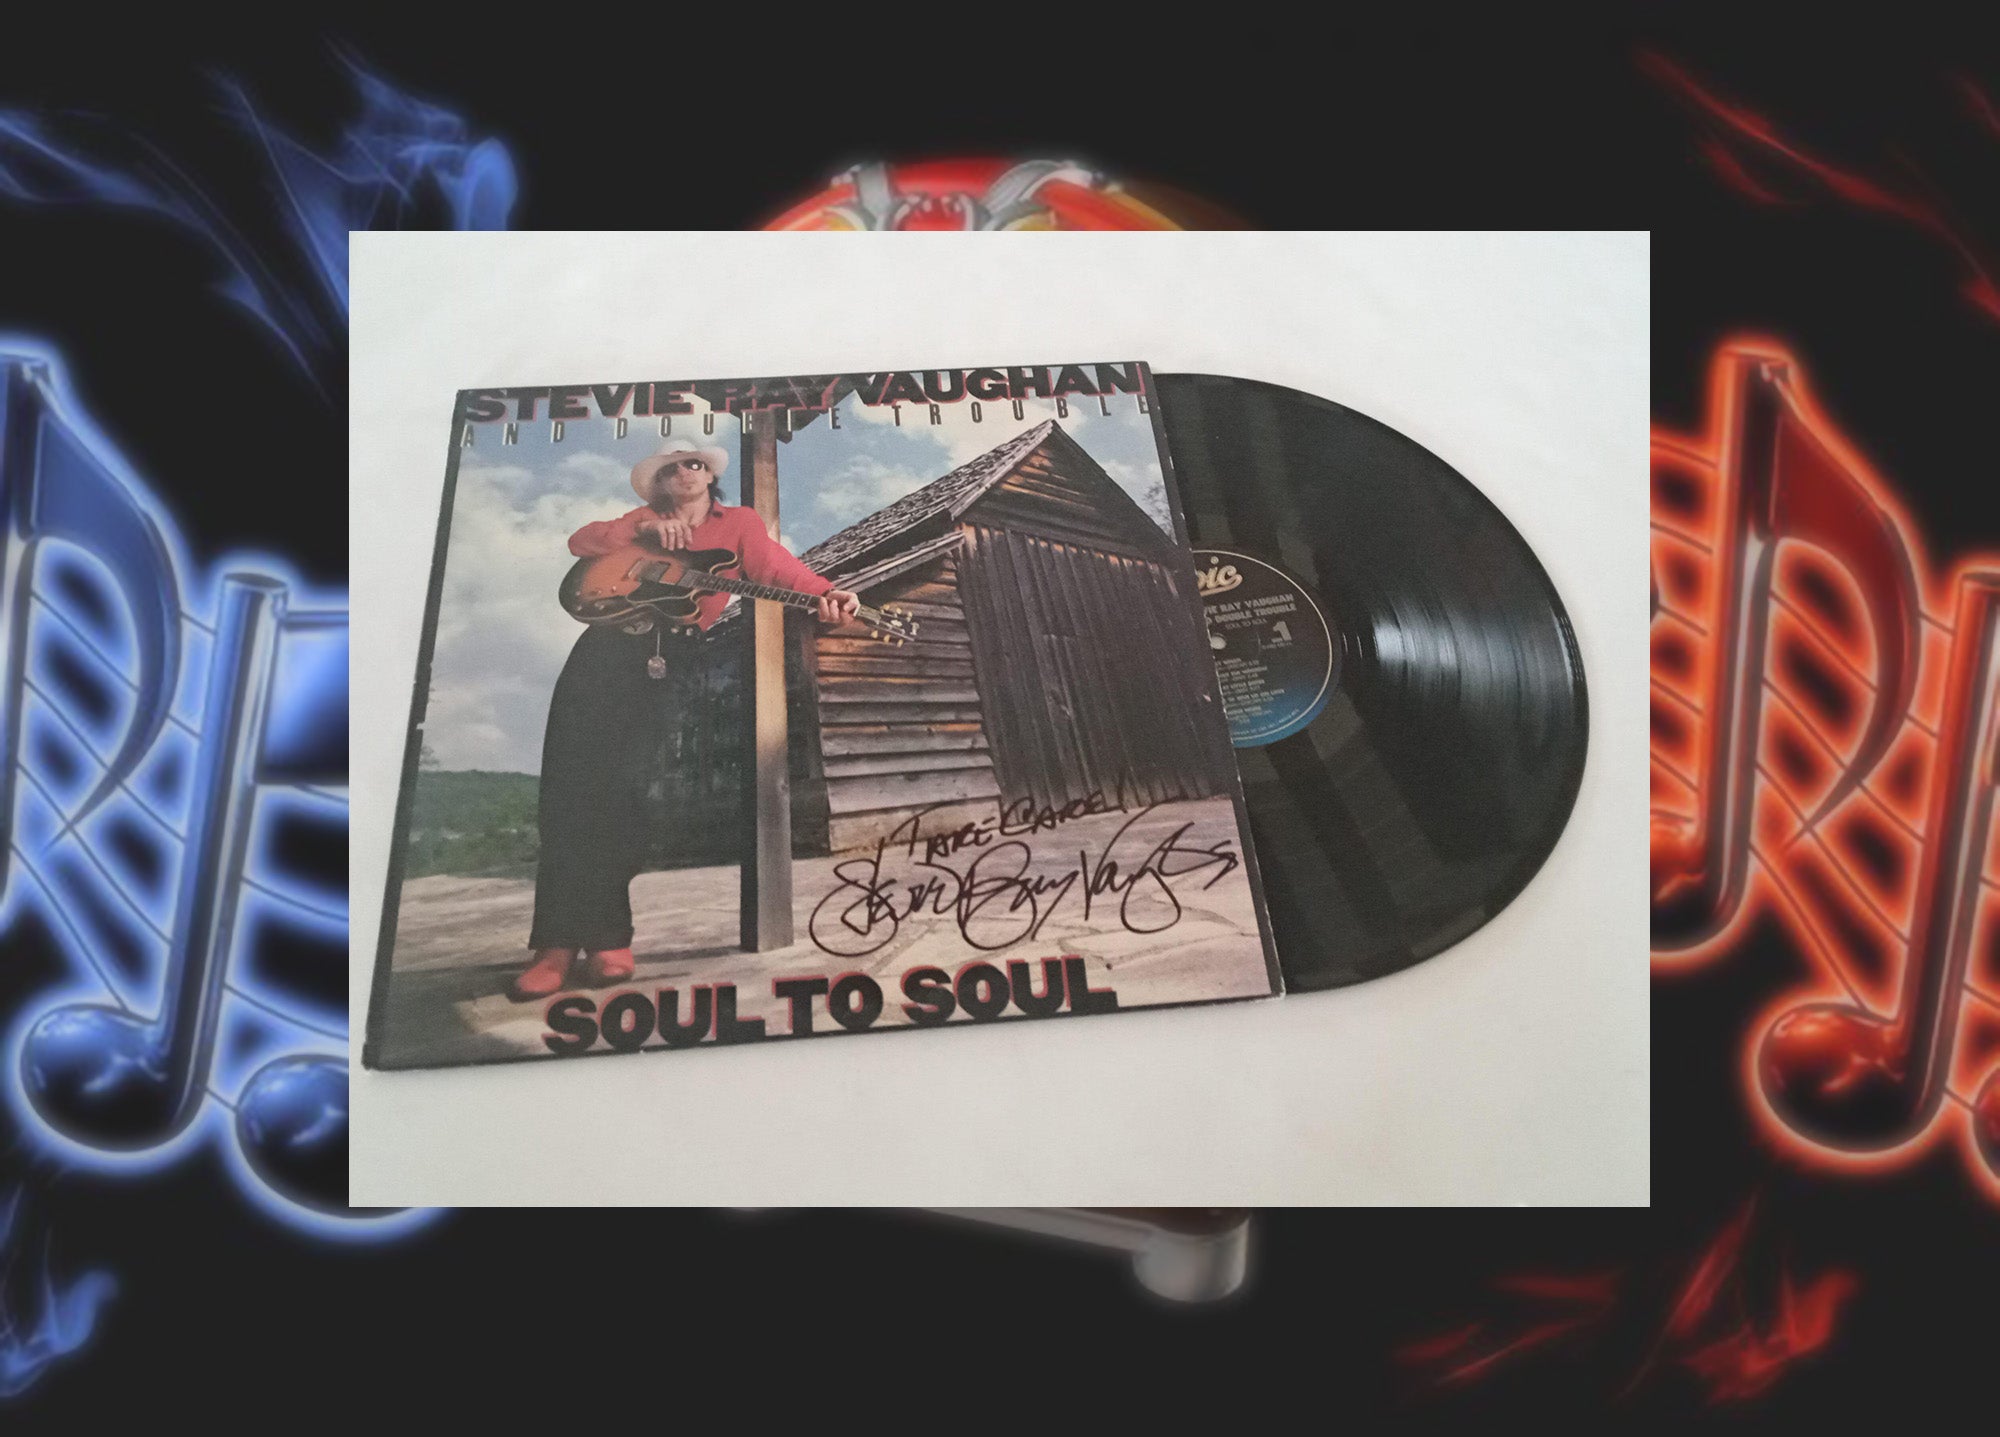 Stevie Ray Vaughan 'Soul to Soul' LP album signed with proof